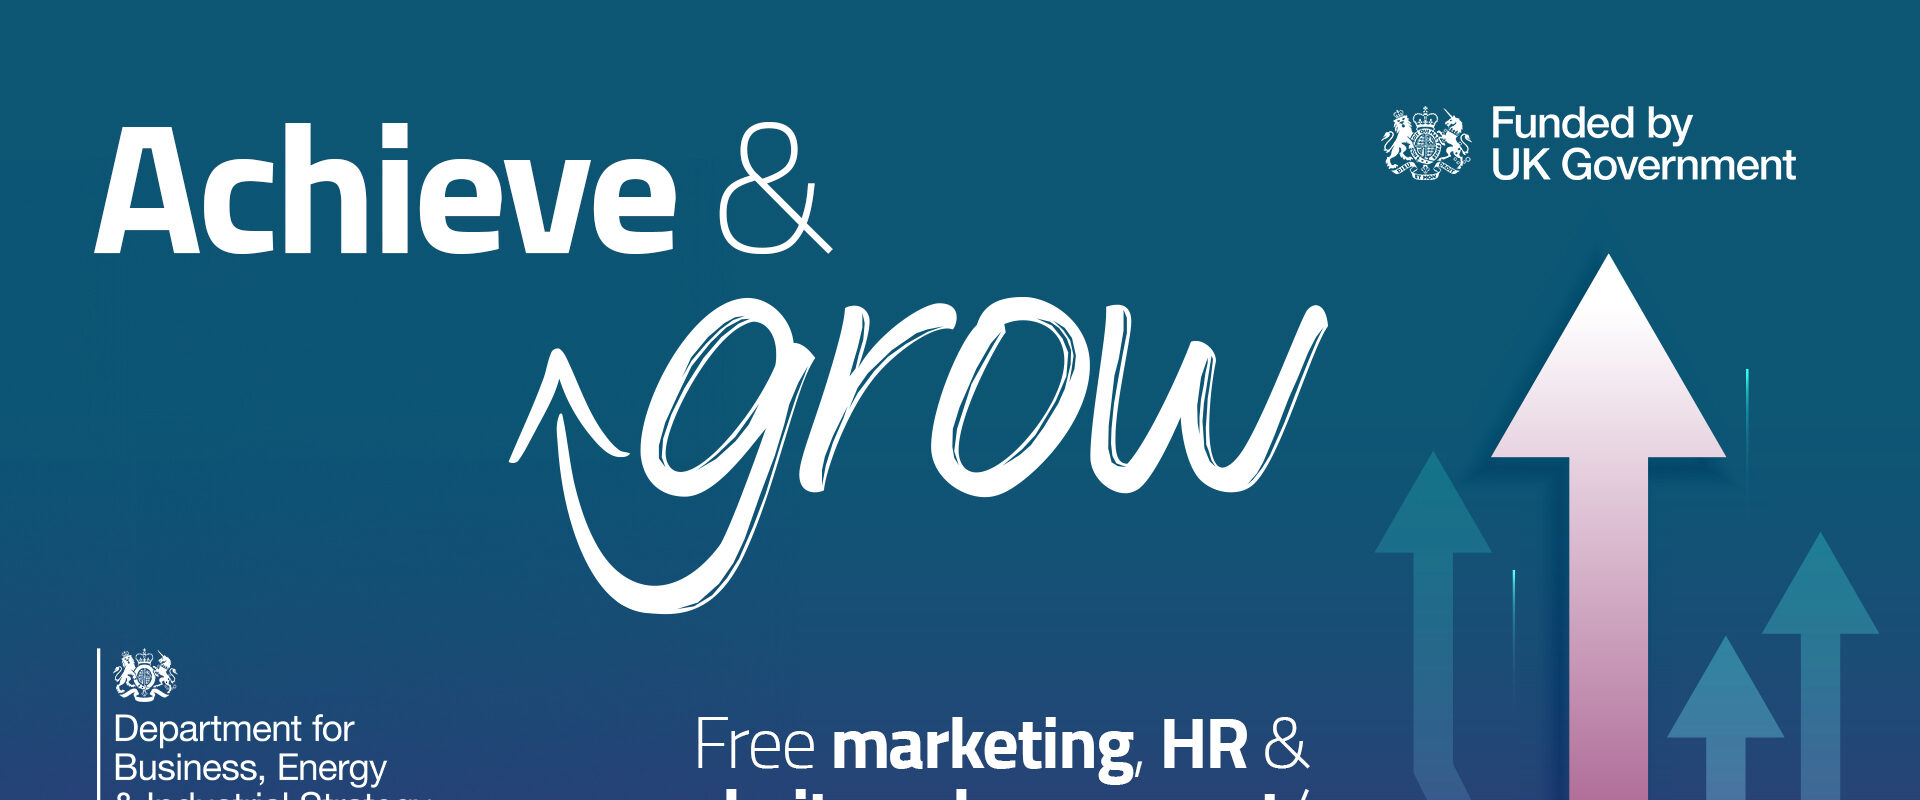 Free marketing, HR and website enhancement/marketing support for microbusinesses